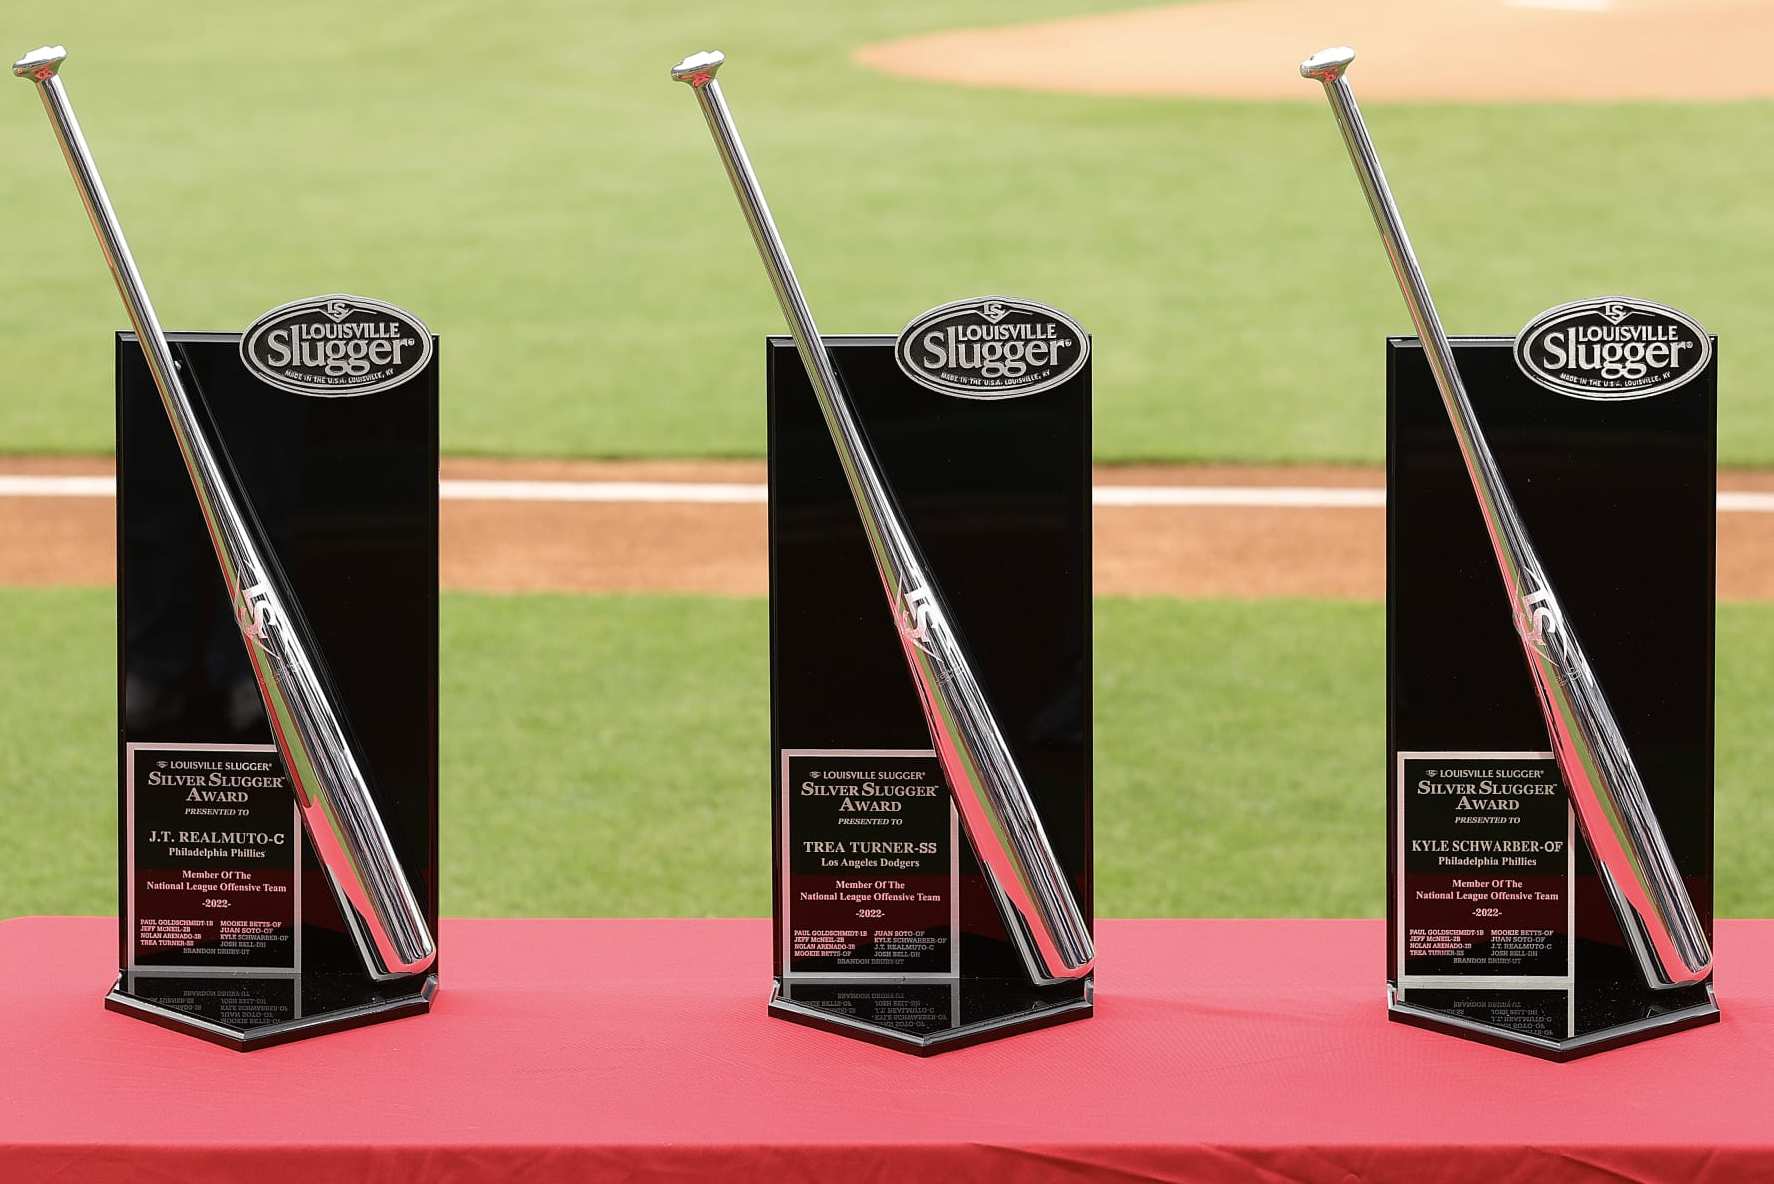 Padres have 5 Silver Slugger finalists